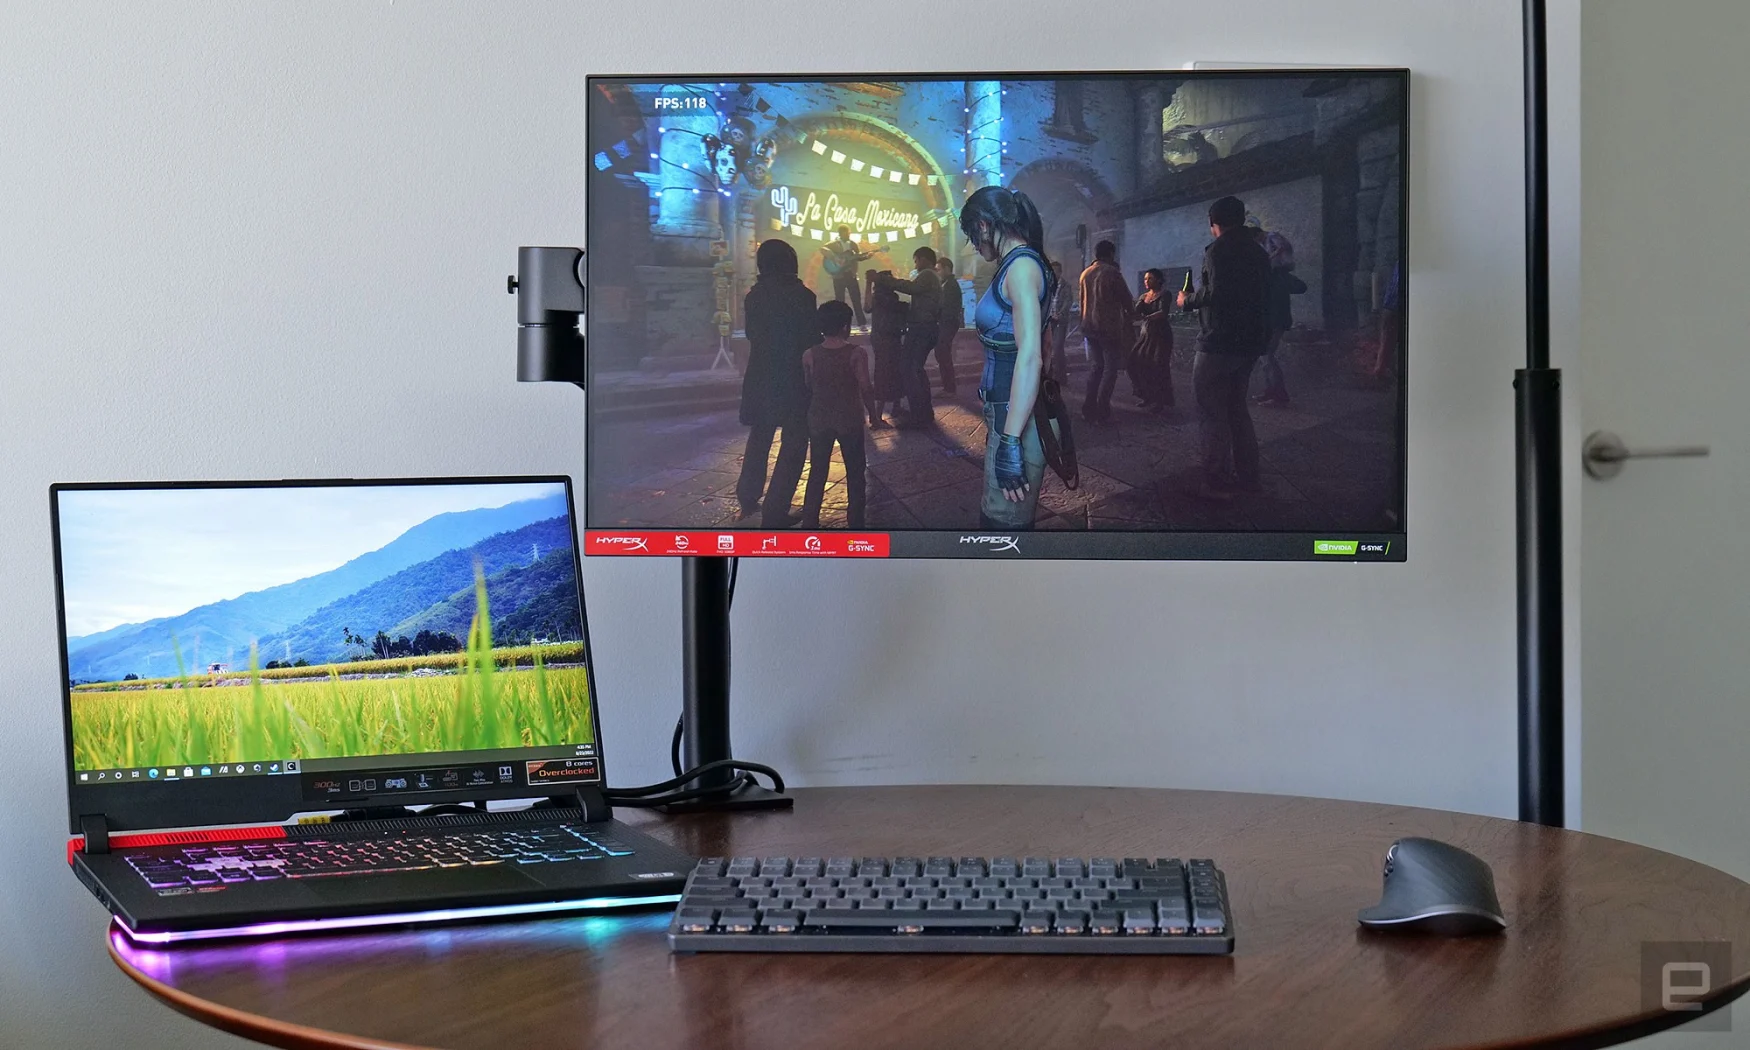 Unlike other monitors, HyperX's Armada line of gaming monitors has ditched the traditional desktop stand in favor of an included display stand for less cluttered setup and easier adjustment. . 